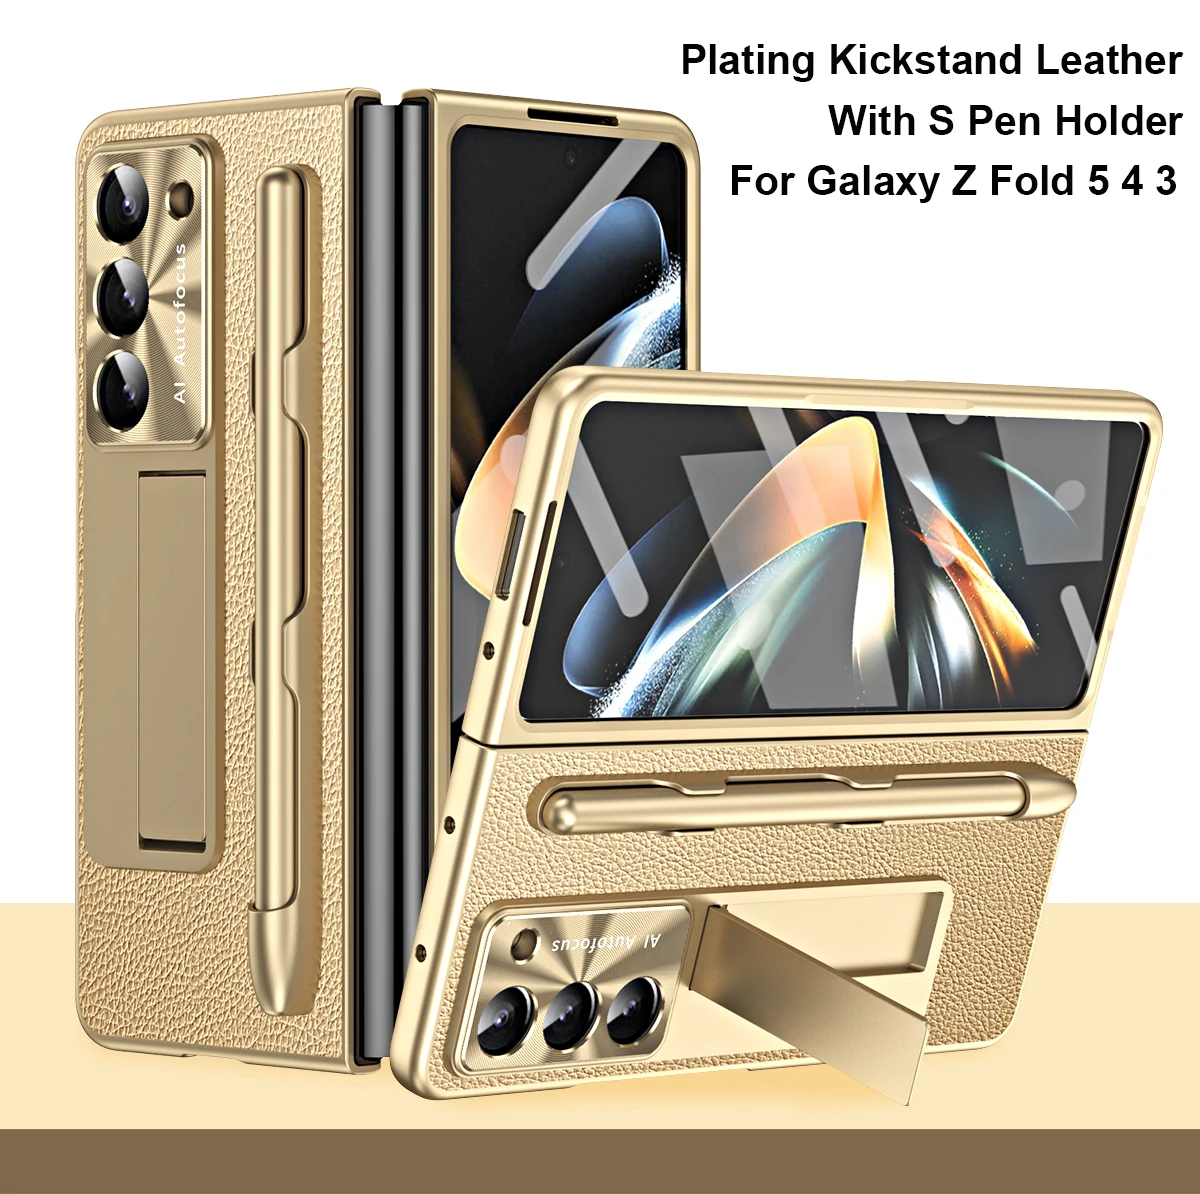 

For Samsung Galaxy Z Fold 5 Hinge Case Leather Fold 4 3 With S Pen Holder Full Protection Shockproof Plating Kickstand Cover